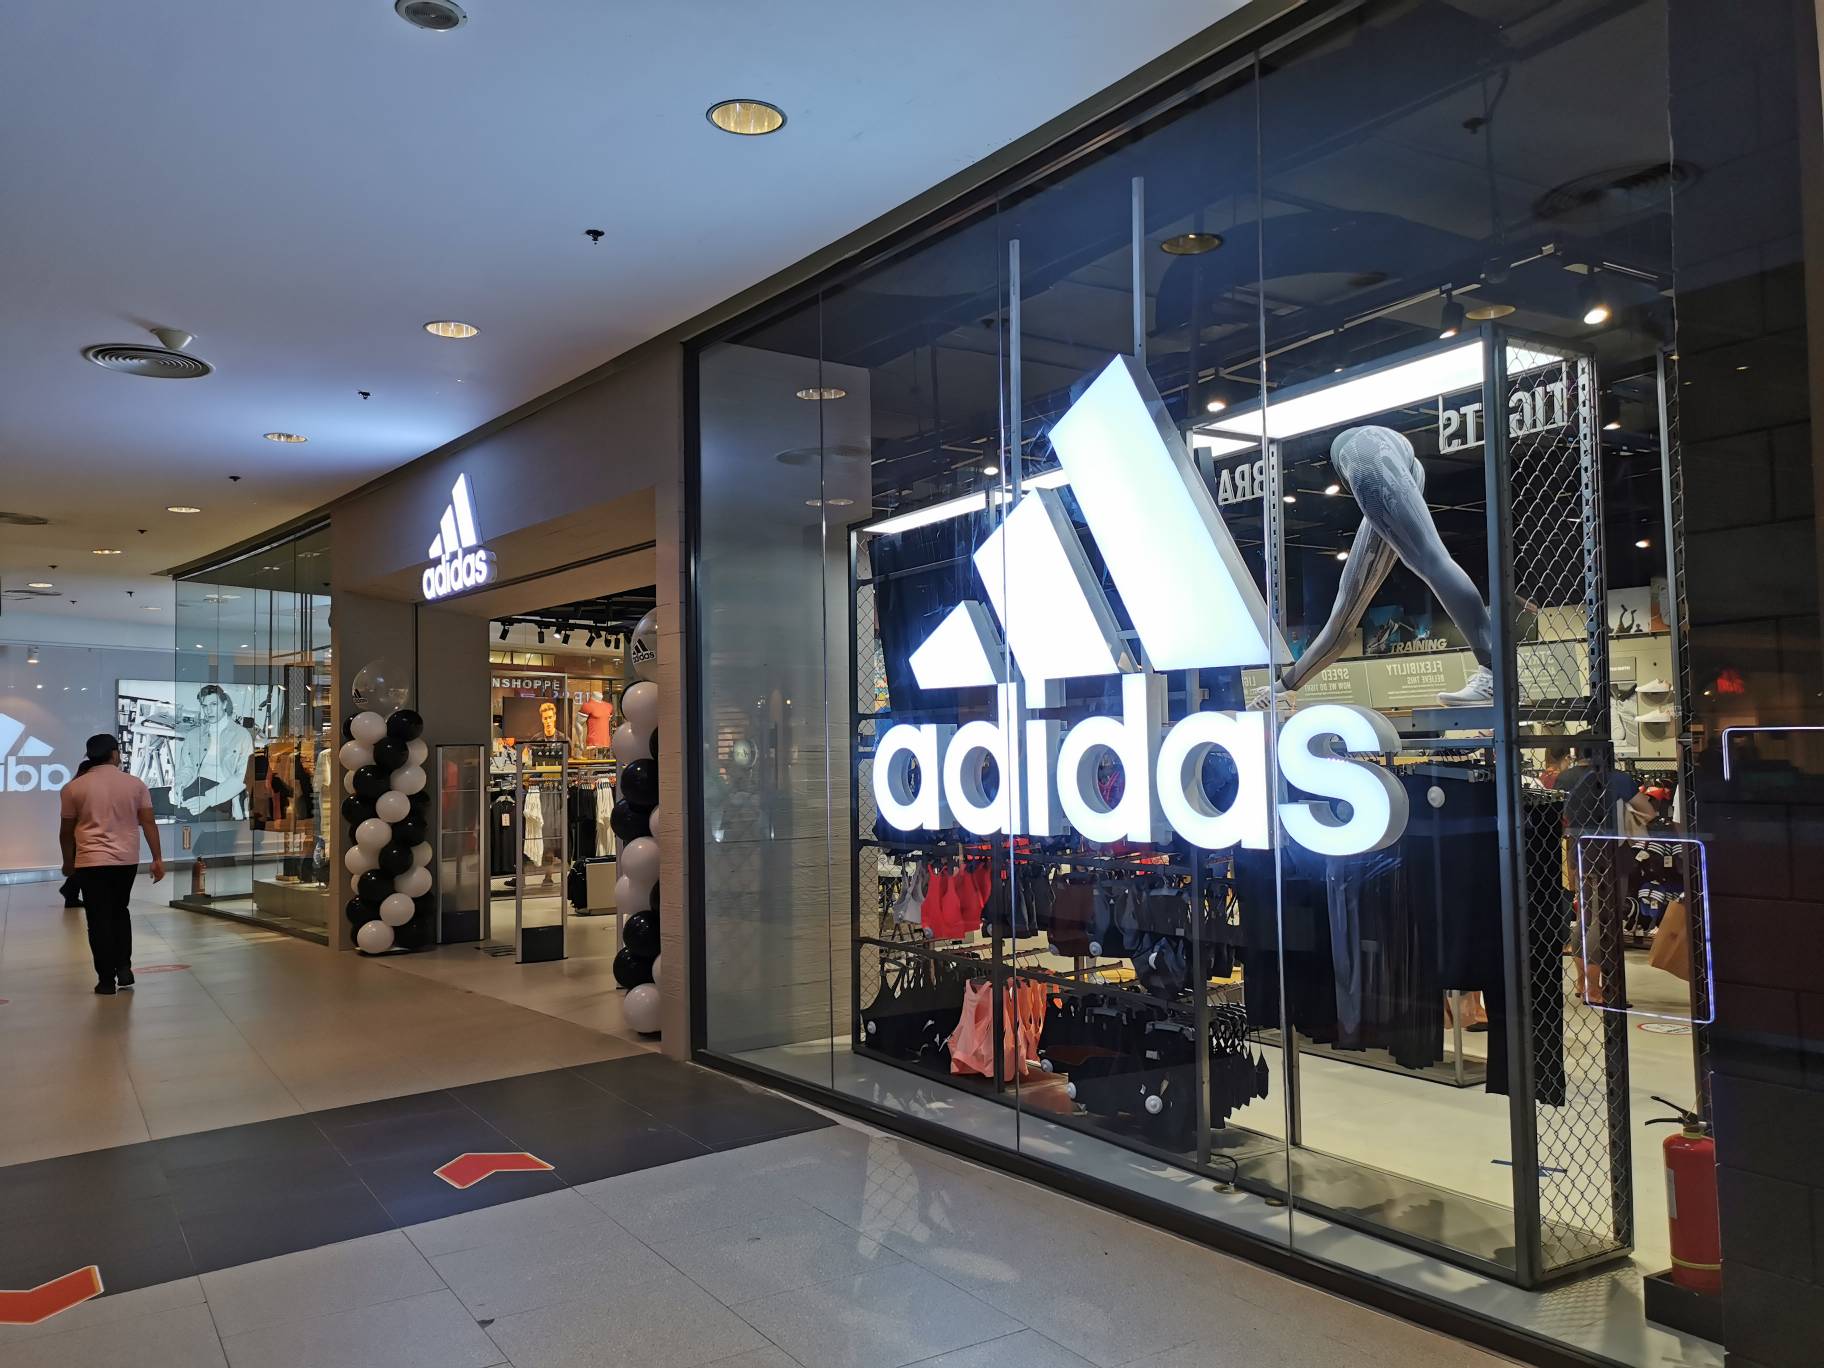 MarQuee Mall on Twitter: "Adidas is NOW Drop by soon at 1 the Activity Center! Get 30 to 50% off on select items until tomorrow, November 15! See you